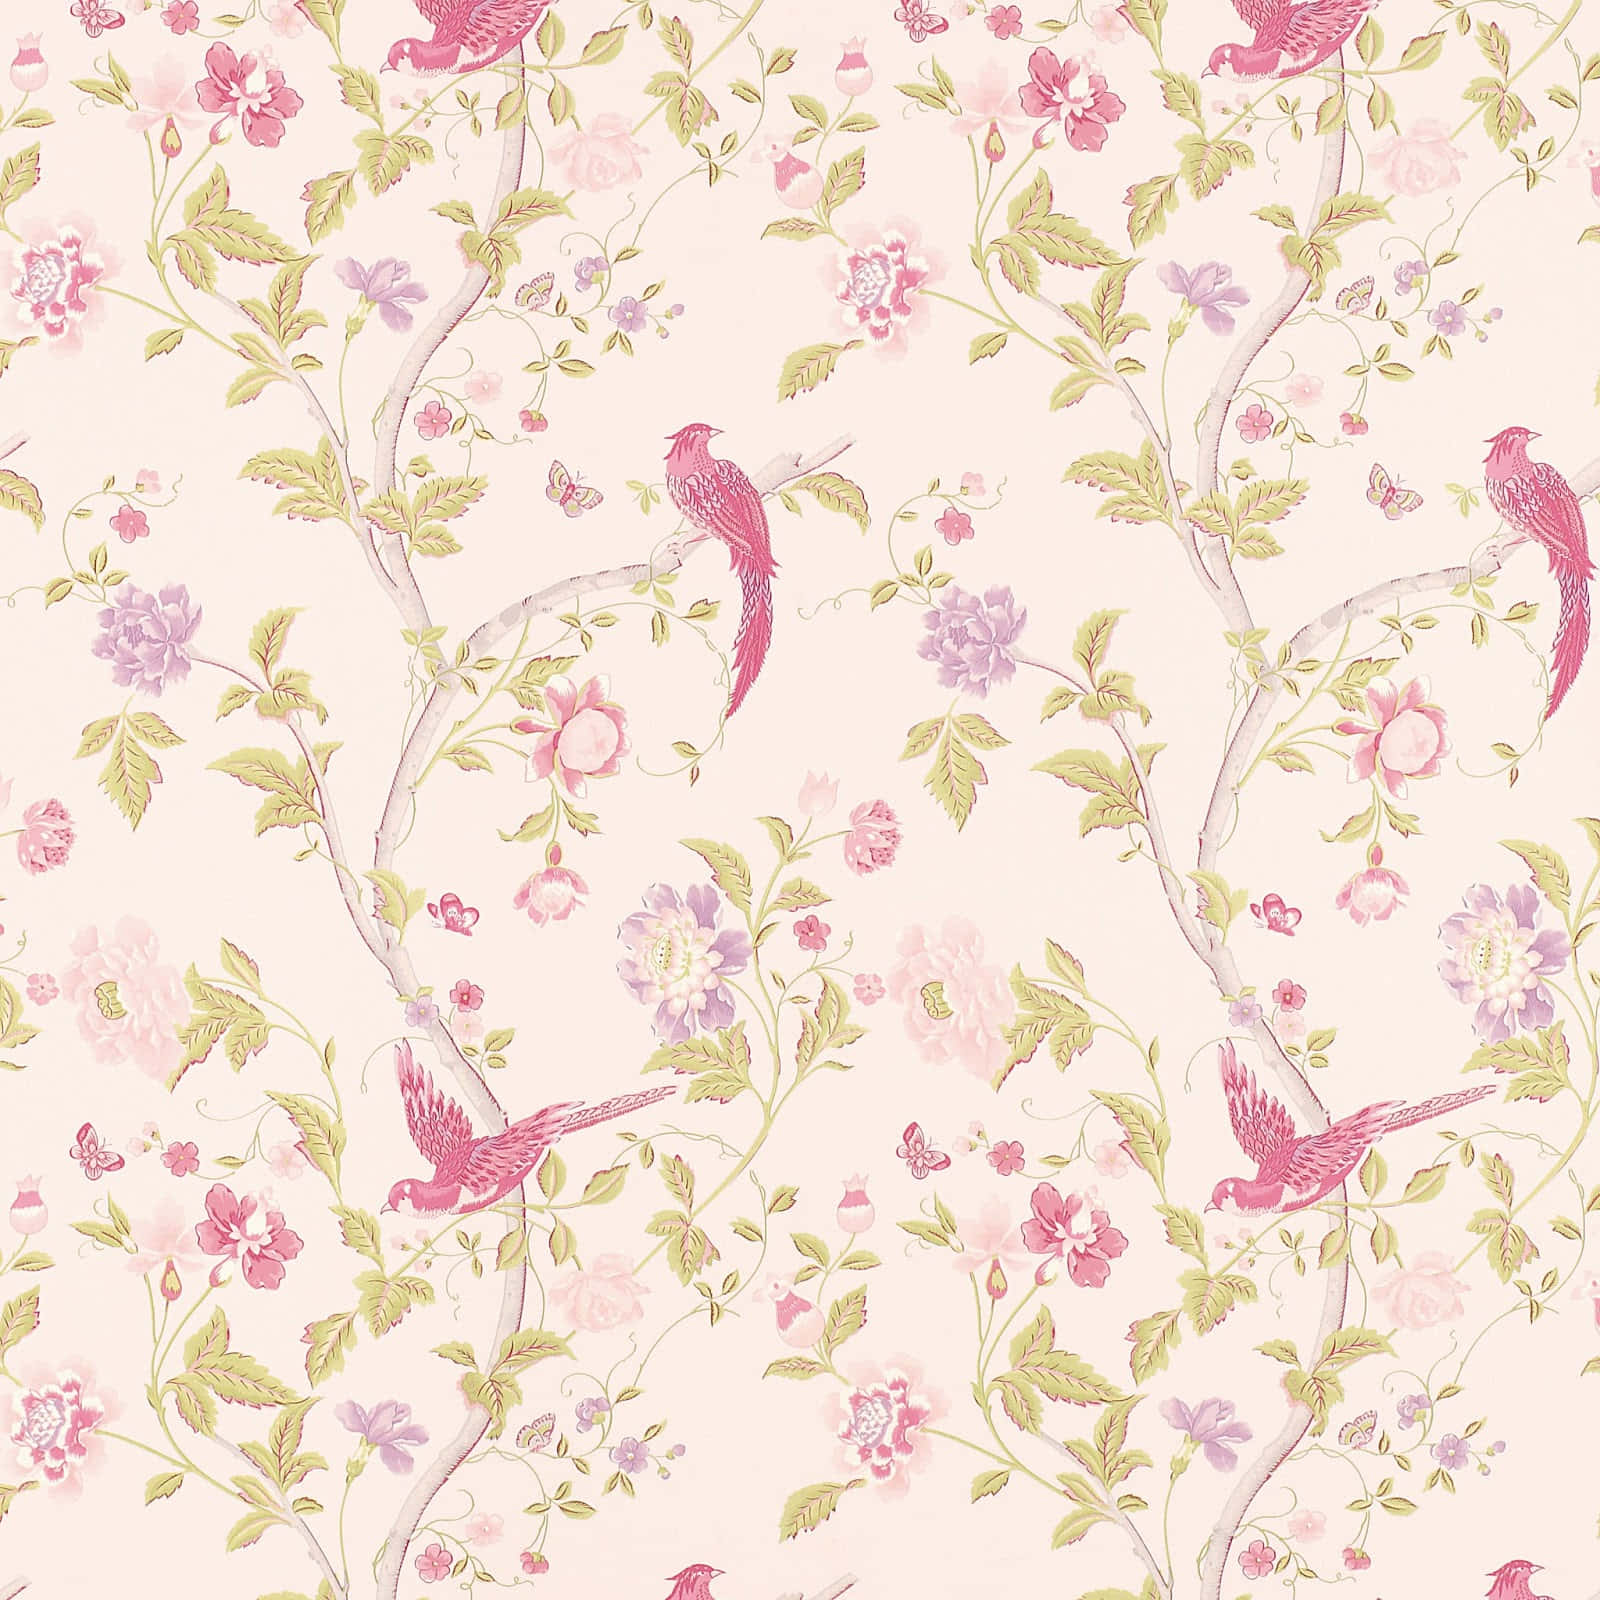 A beautiful, vintage floral background to brighten up any room